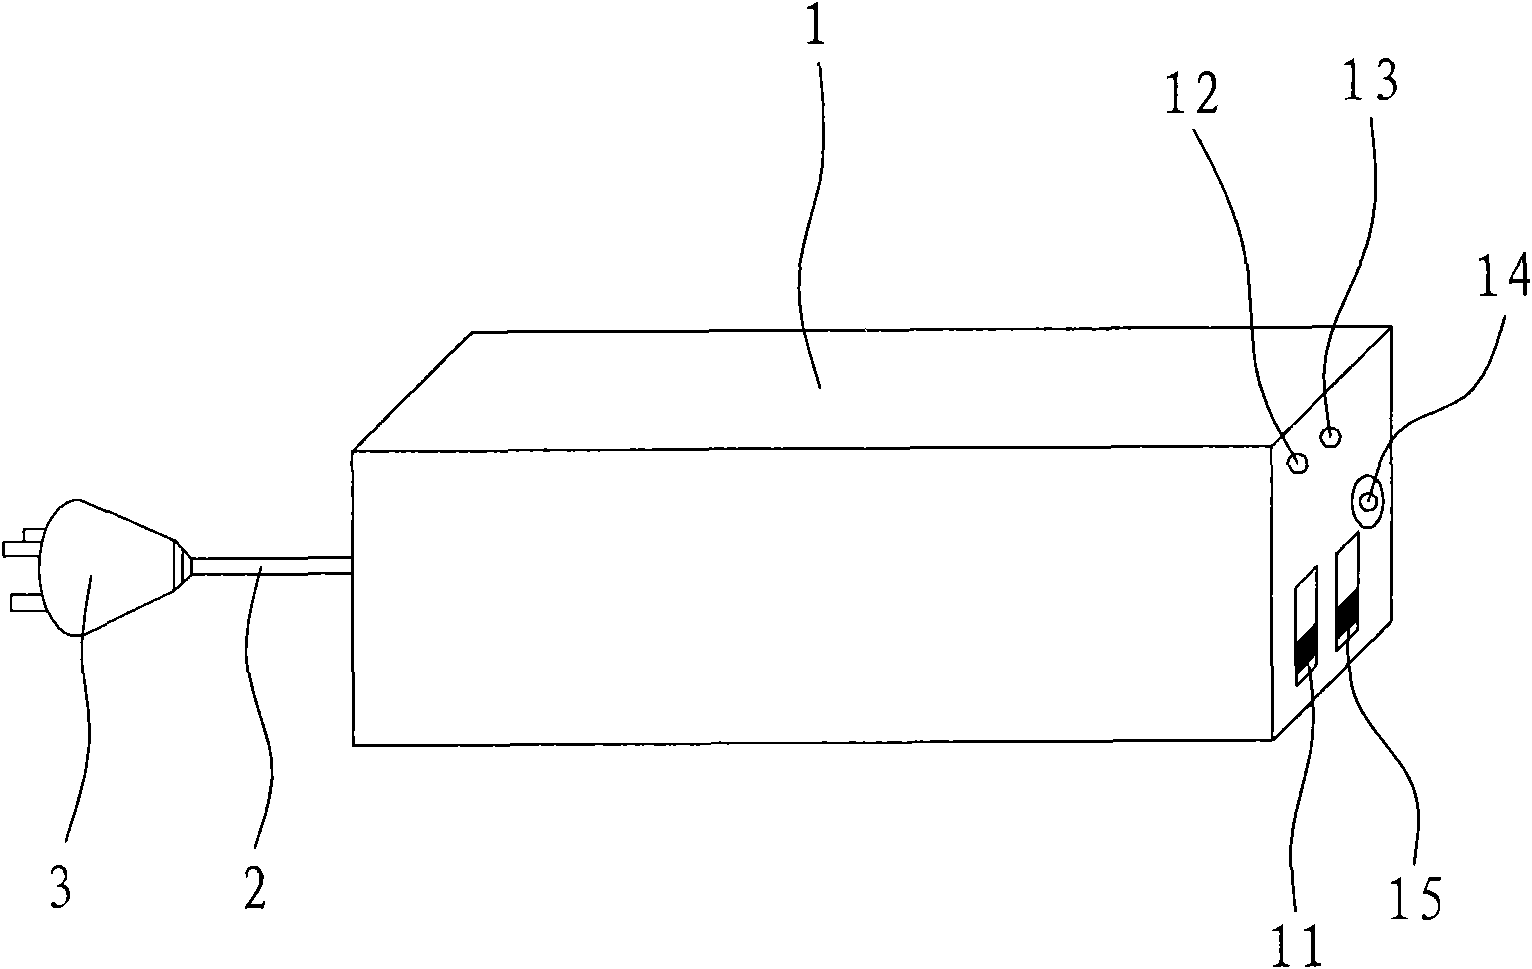 Self-stabilizing conducting comb signal source